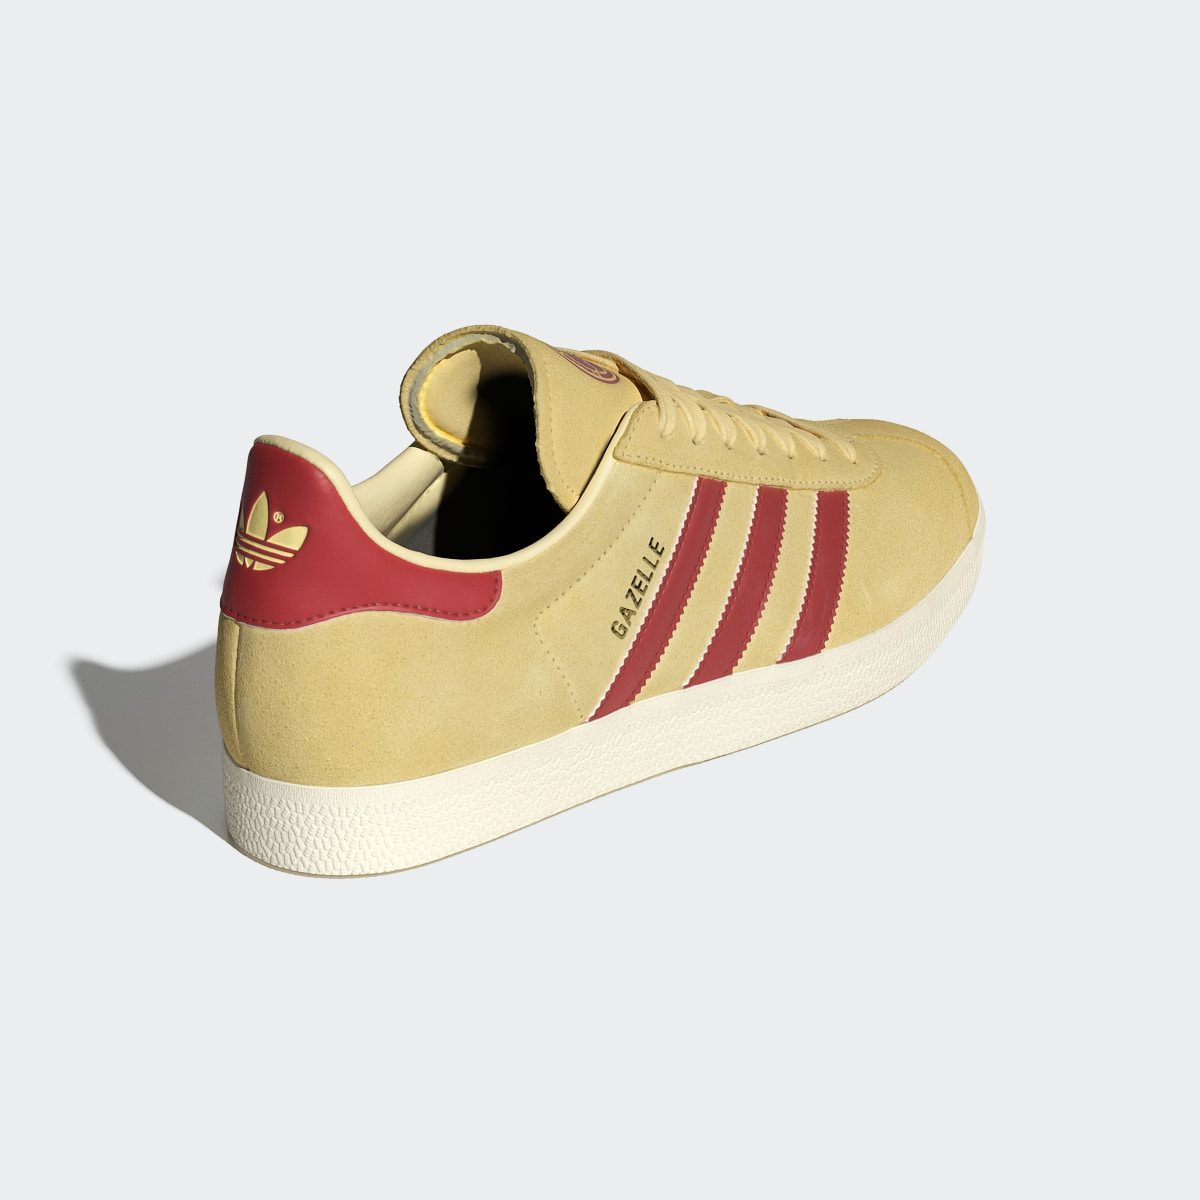 Adidas Gazelle Colombia Shoes. 6